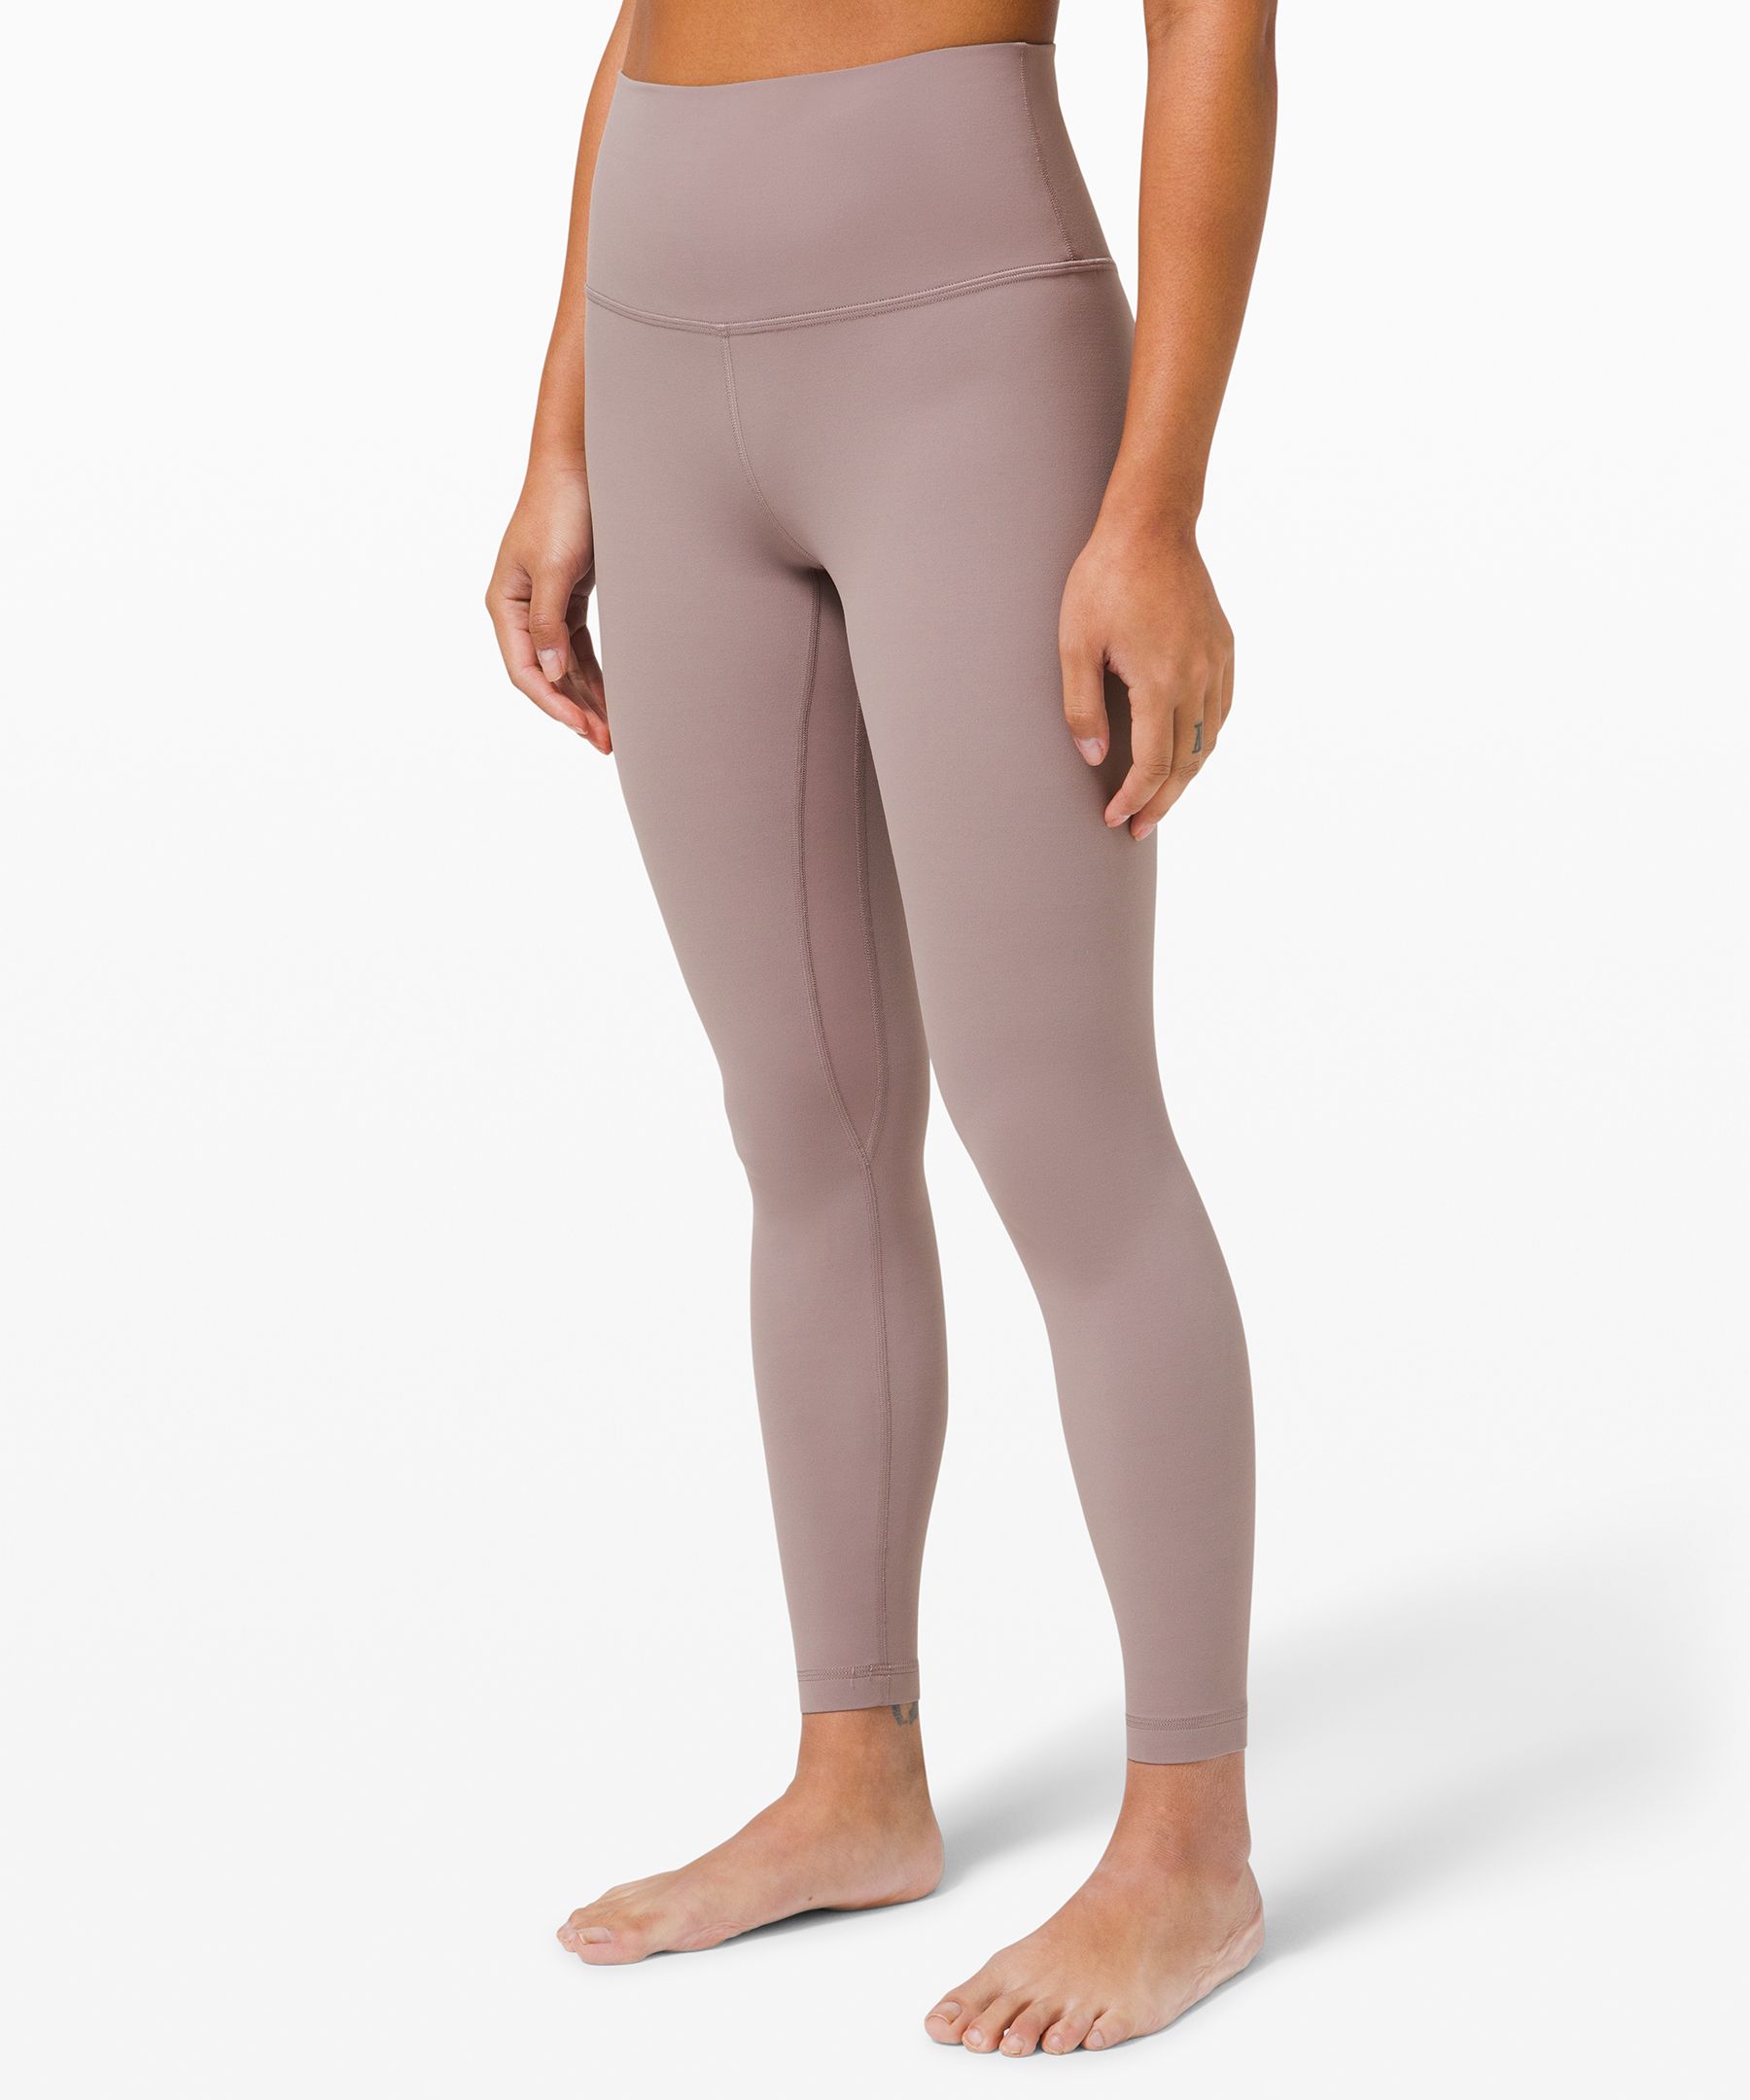 lululemon Align™ High-Rise Pant with Pockets 24 *Asia Fit